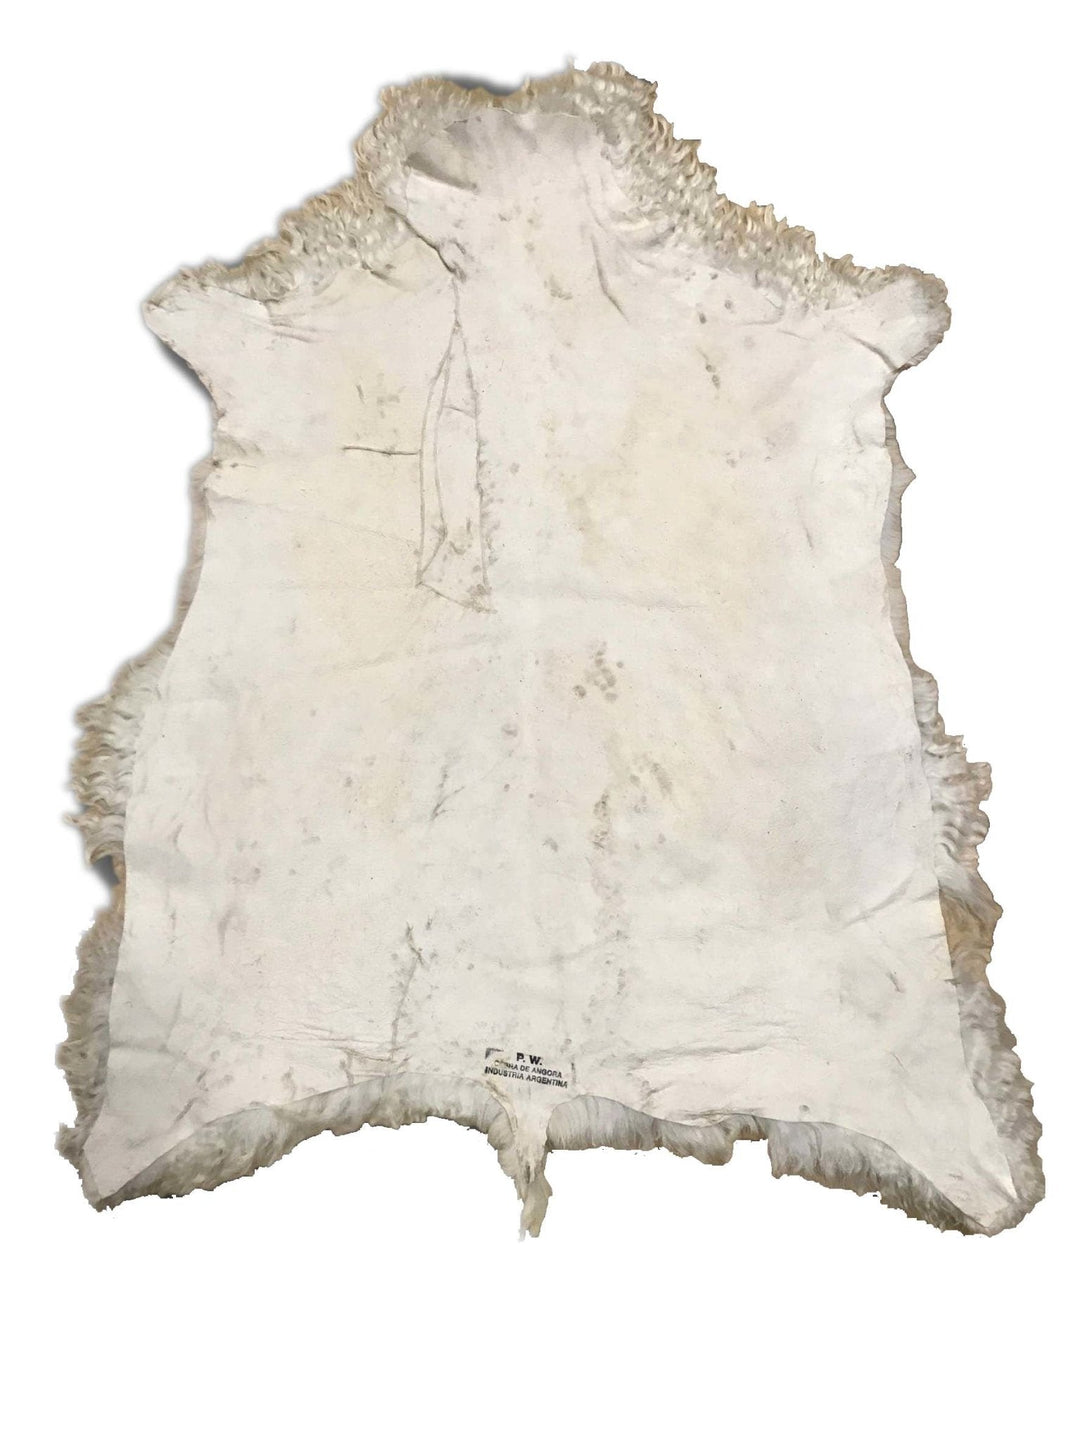 Angora Goat Hide - White - Hides & Leather Store - By Trahide -